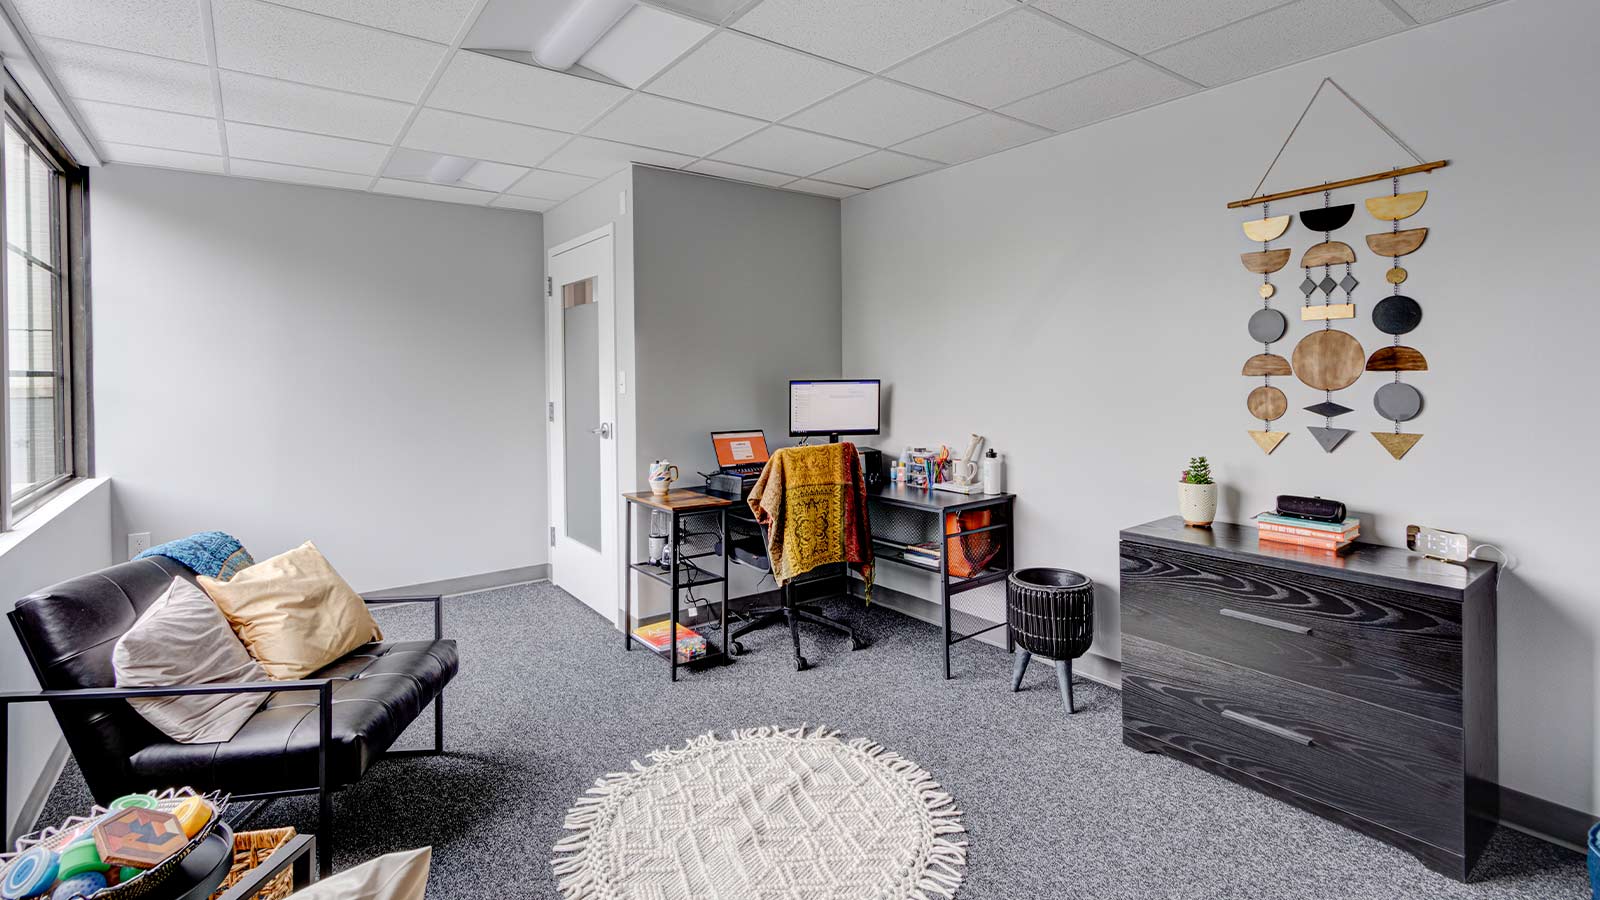 A cozy office space with warm colors and multiple seating options.